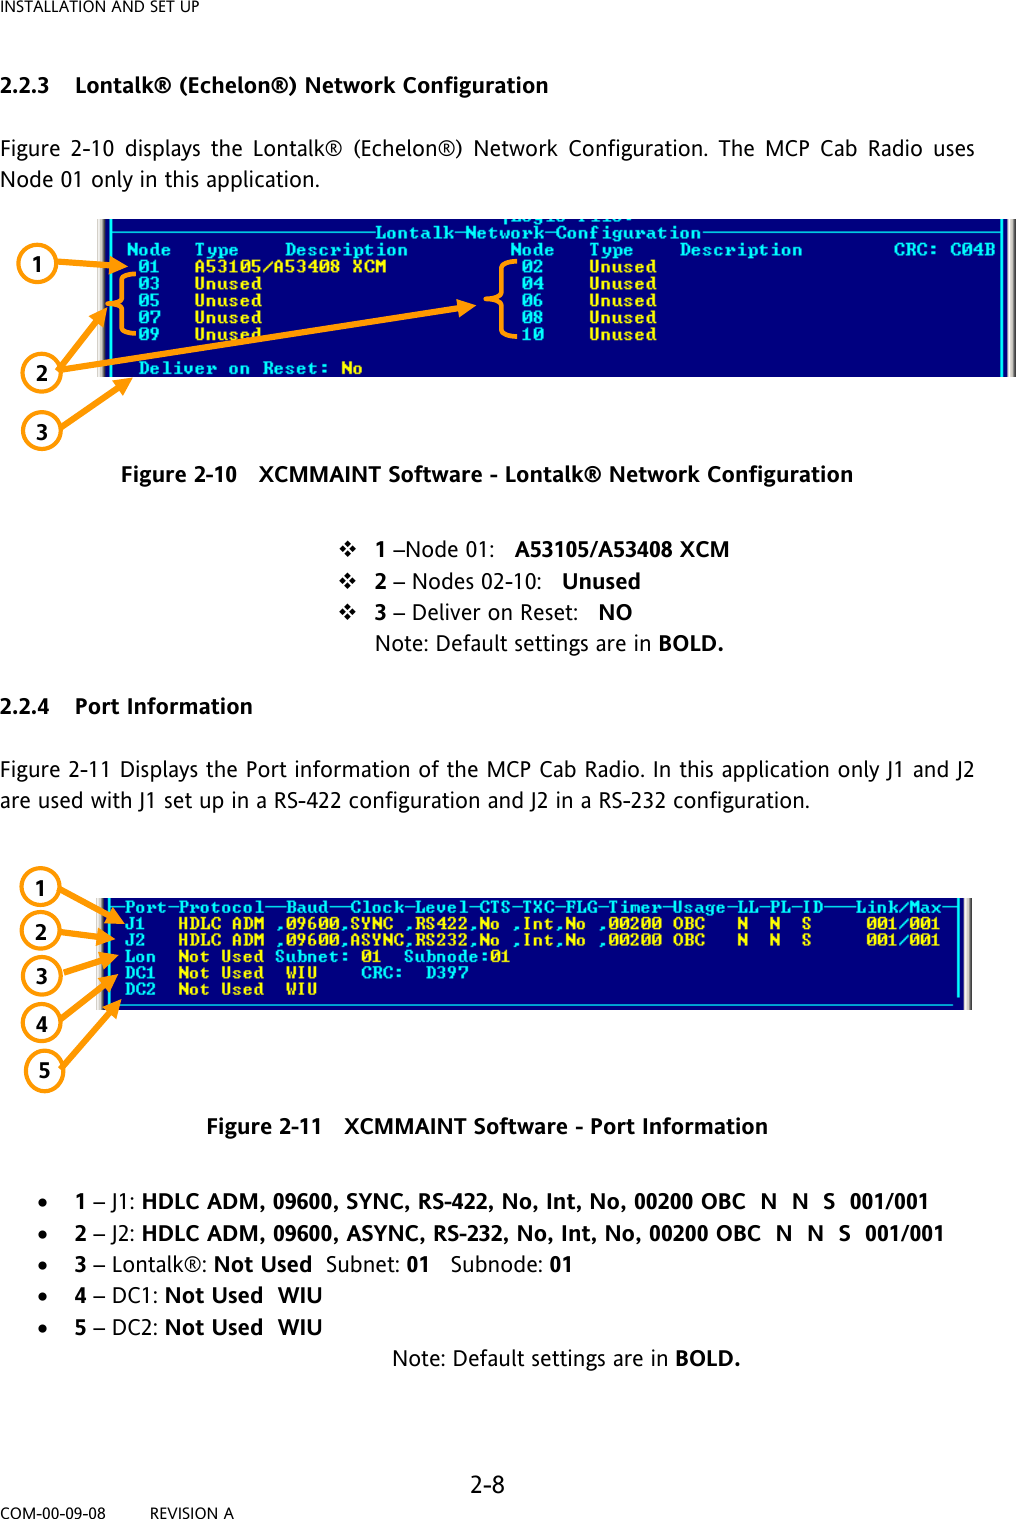 INSTALLATION AND SET UP   2-8 COM-00-09-08         REVISION A 2.2.3 Lontalk® (Echelon®) Network Configuration  Figure 2-10 displays the Lontalk® (Echelon®) Network Configuration. The MCP Cab Radio uses Node 01 only in this application.         Figure 2-10   XCMMAINT Software - Lontalk® Network Configuration   1 –Node 01:   A53105/A53408 XCM  2 – Nodes 02-10:   Unused  3 – Deliver on Reset:   NO  Note: Default settings are in BOLD.  2.2.4 Port Information  Figure 2-11 Displays the Port information of the MCP Cab Radio. In this application only J1 and J2 are used with J1 set up in a RS-422 configuration and J2 in a RS-232 configuration.          Figure 2-11   XCMMAINT Software - Port Information  • 1 – J1: HDLC ADM, 09600, SYNC, RS-422, No, Int, No, 00200 OBC  N  N  S  001/001 • 2 – J2: HDLC ADM, 09600, ASYNC, RS-232, No, Int, No, 00200 OBC  N  N  S  001/001 • 3 – Lontalk®: Not Used  Subnet: 01   Subnode: 01   • 4 – DC1: Not Used  WIU • 5 – DC2: Not Used  WIU                                                           Note: Default settings are in BOLD.   1 2 3 4 1 3 5 2 